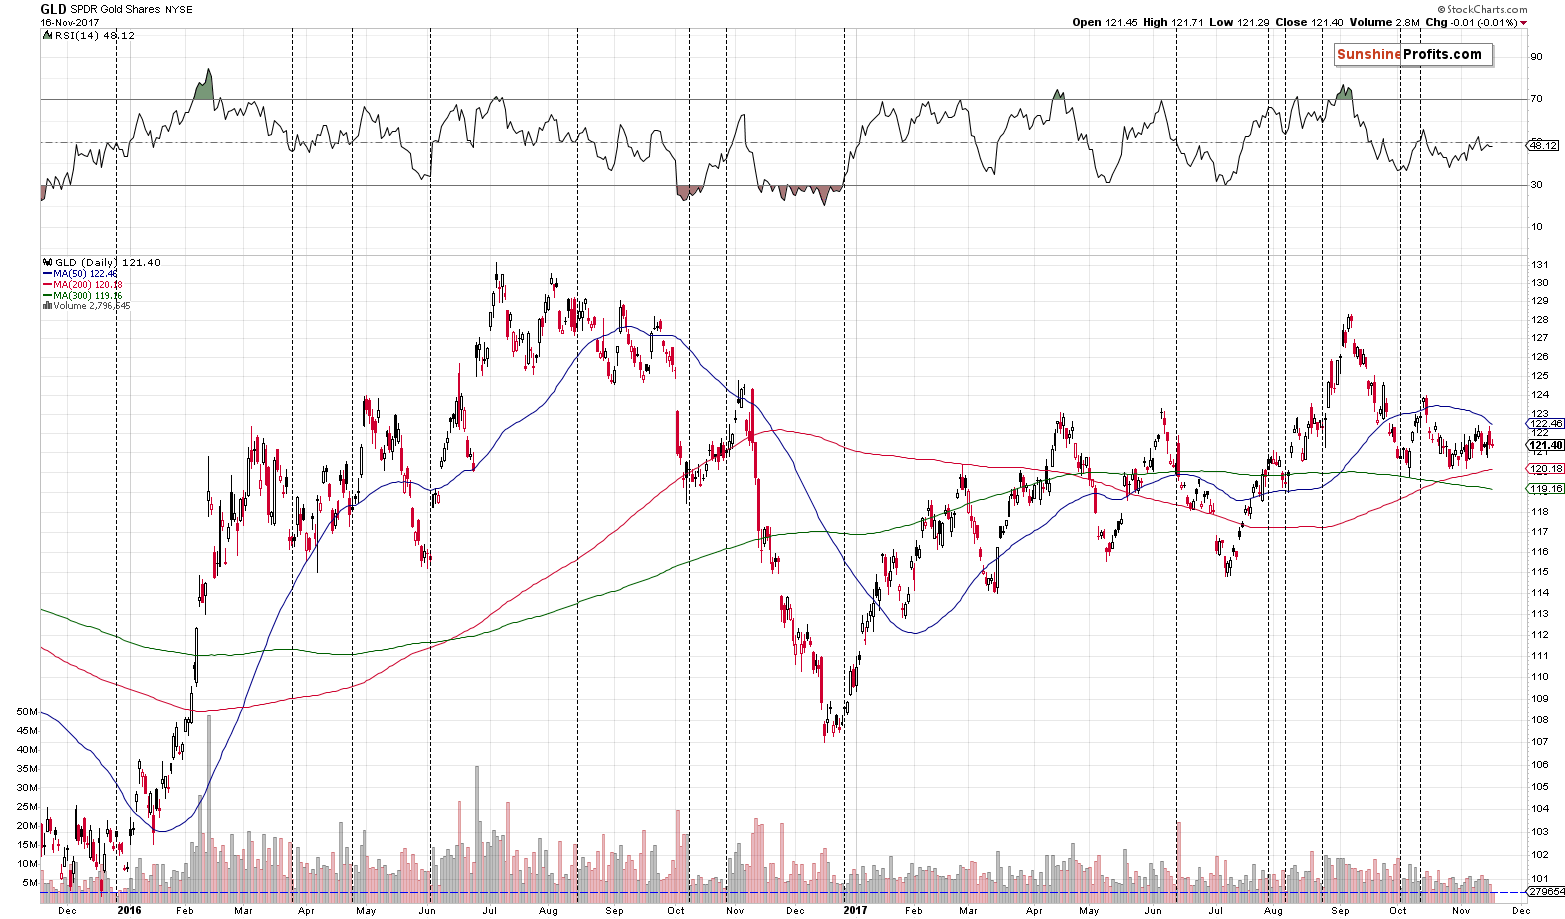 Long-term Gold price chart - GLD ETF - SPDR Gold Shares